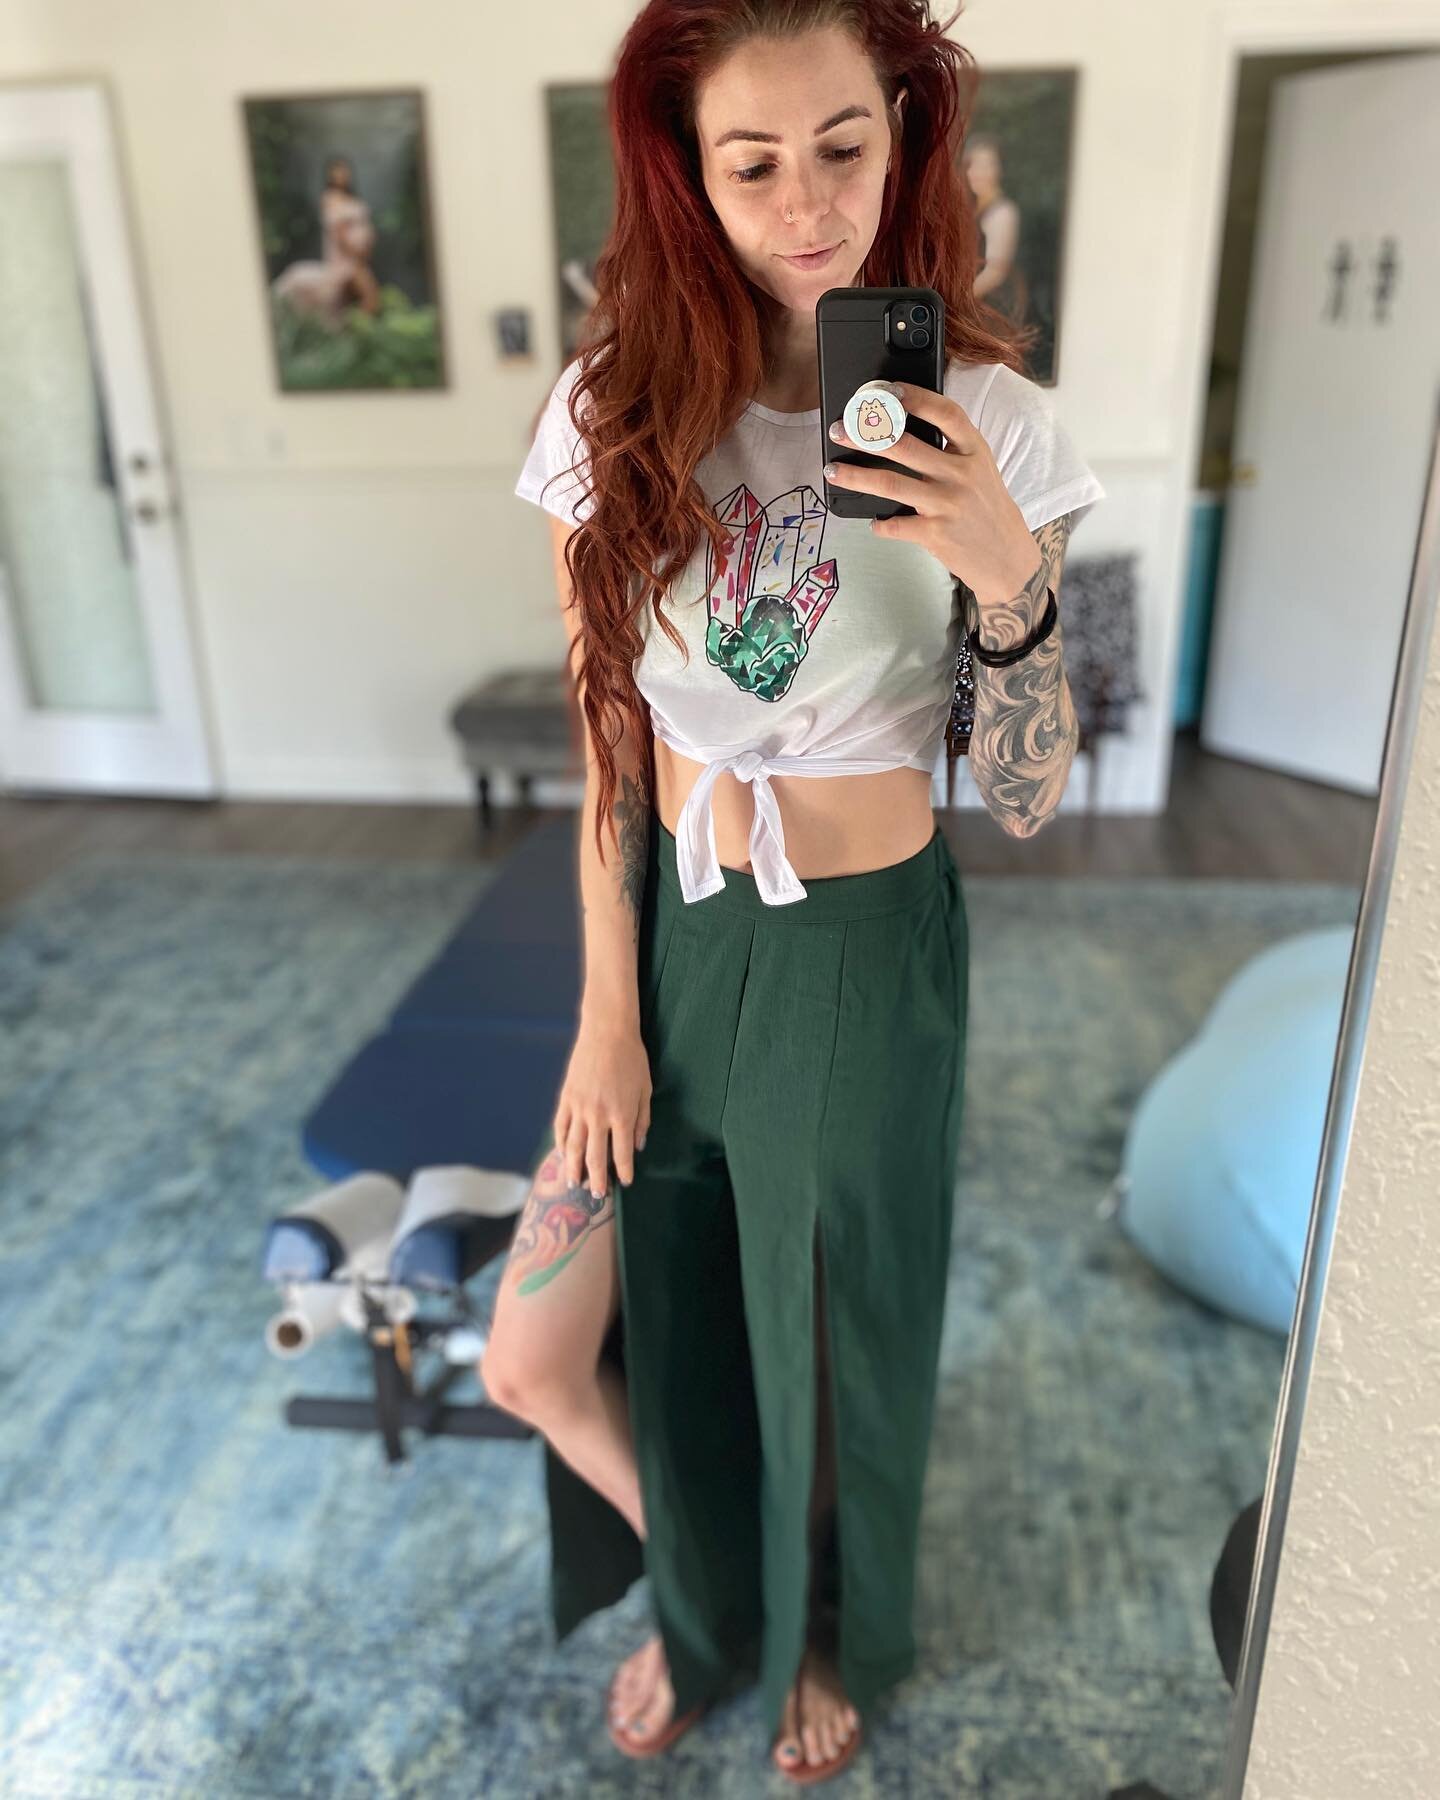 Had a little extra time between patients today so I impromptu made this shirt that just so happens to go with my pants 🥰
.
.
#cricutcrafts #scrapproject #diy #ootd